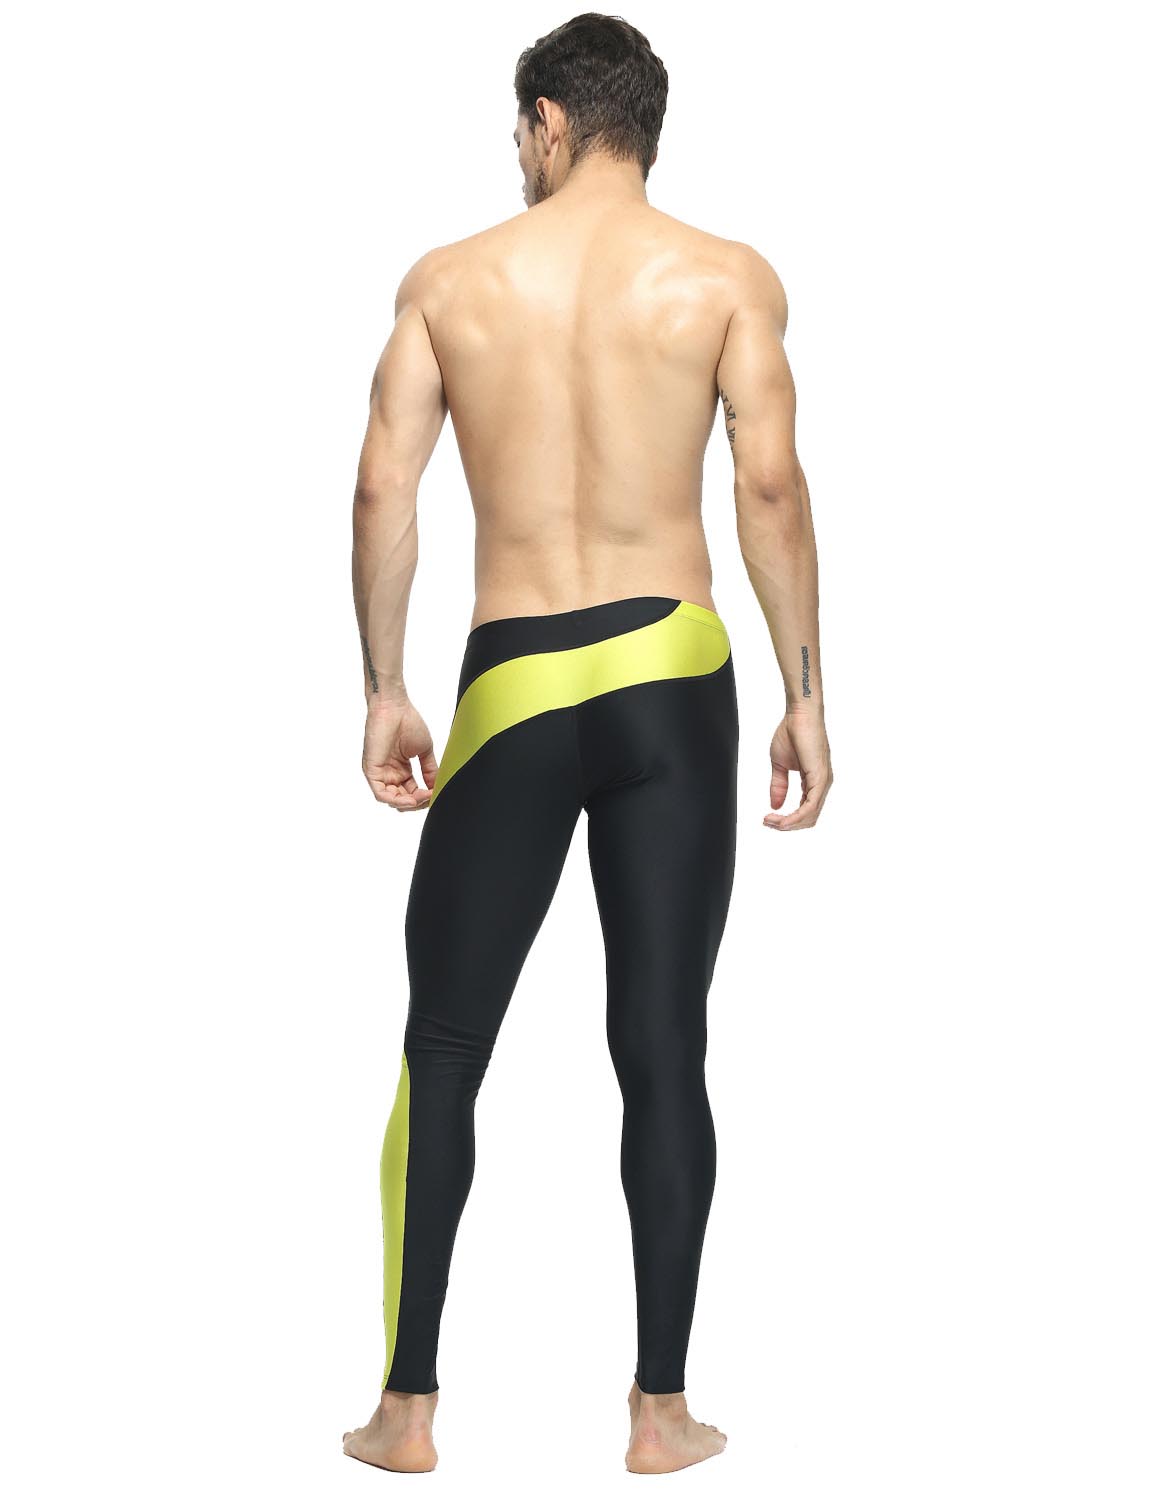 TAUWELL Mens Low Rise Sexy Sports Athletic Compression Tights Leggings 8601  – TAUWELL®